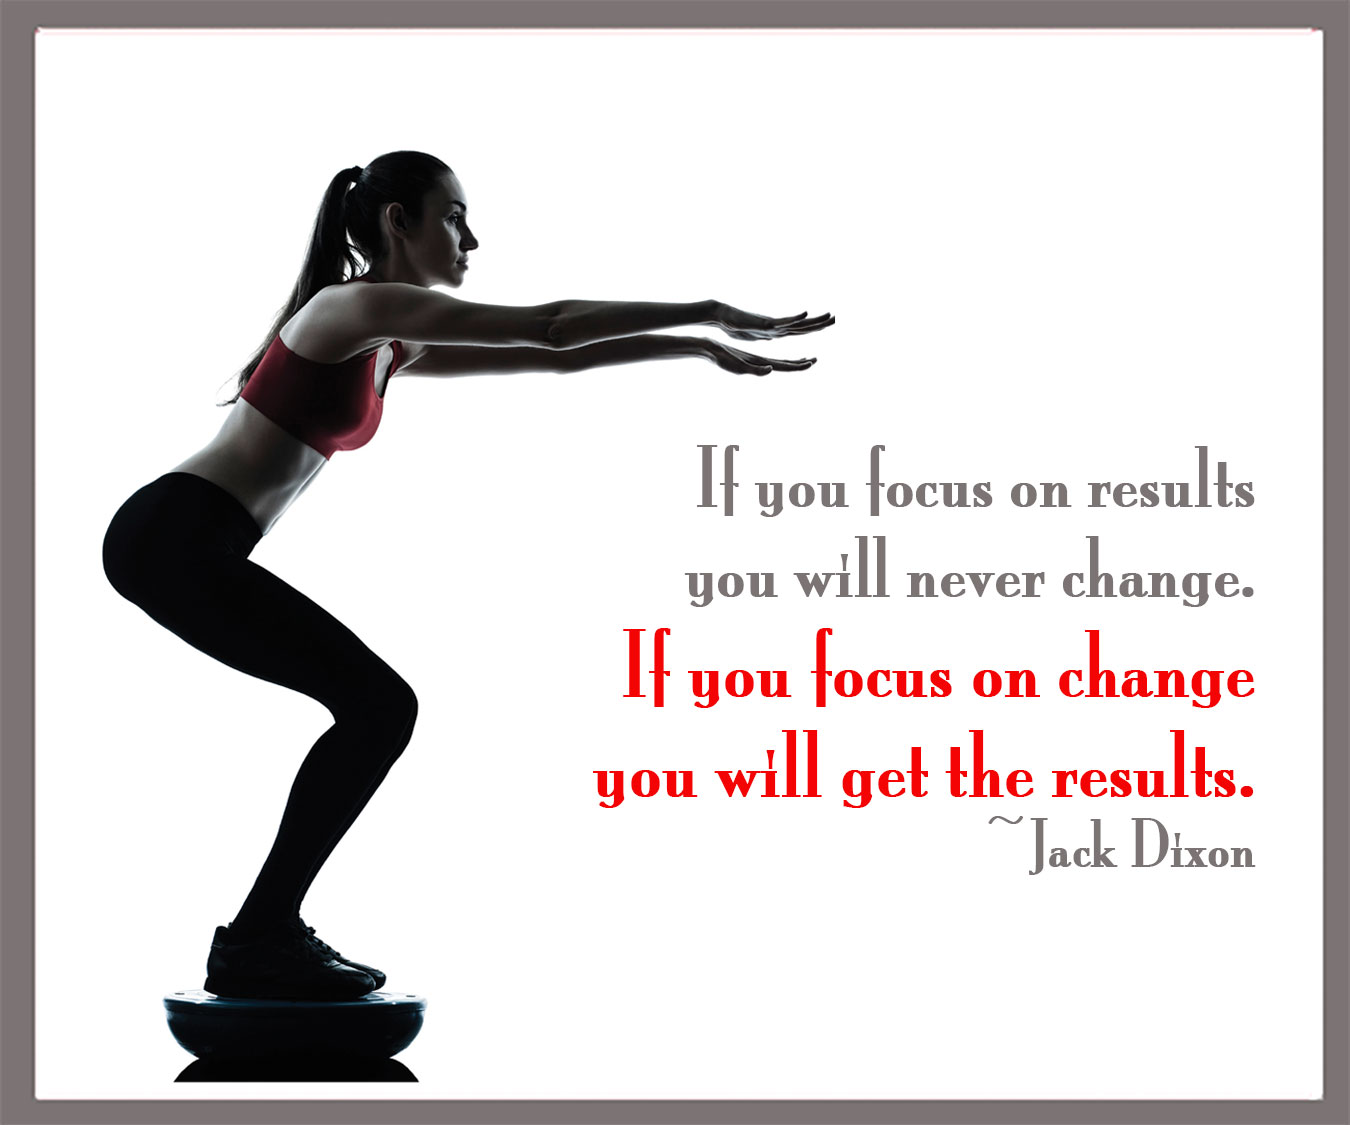 Focus on Change - Living Fit Lifestyle